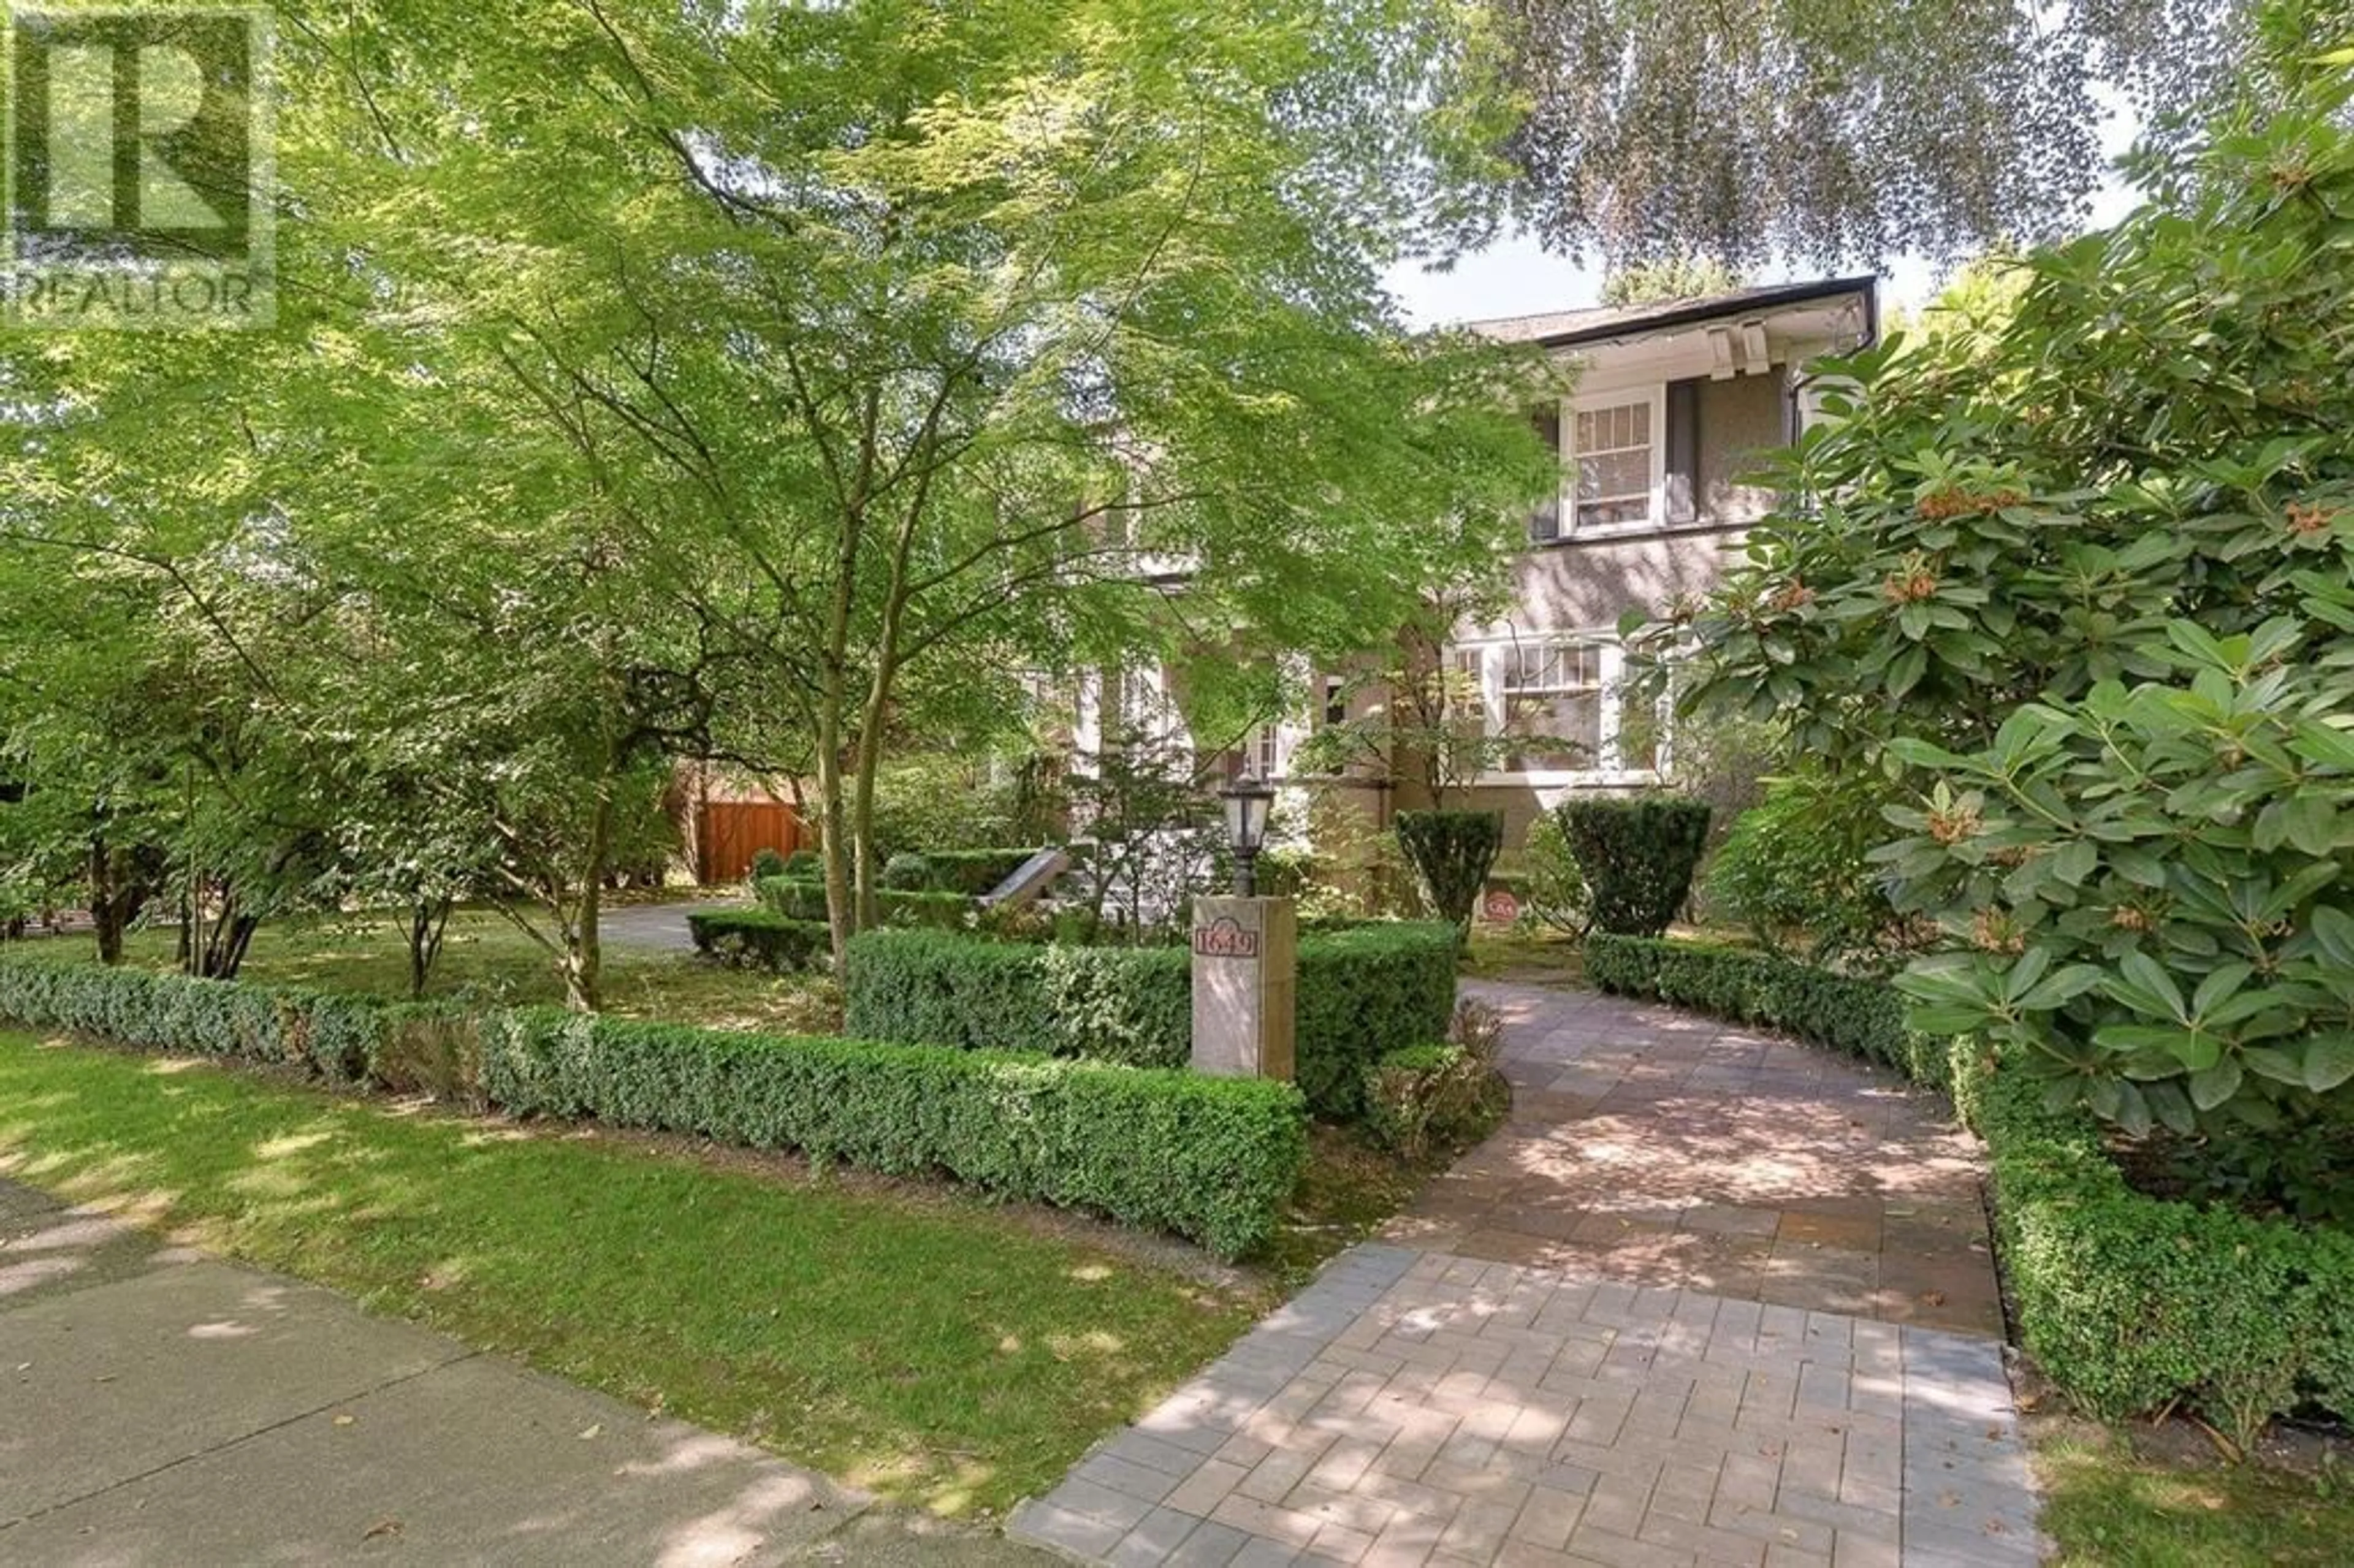 Street view for 1649 W 29TH AVENUE, Vancouver British Columbia V6J2Z3